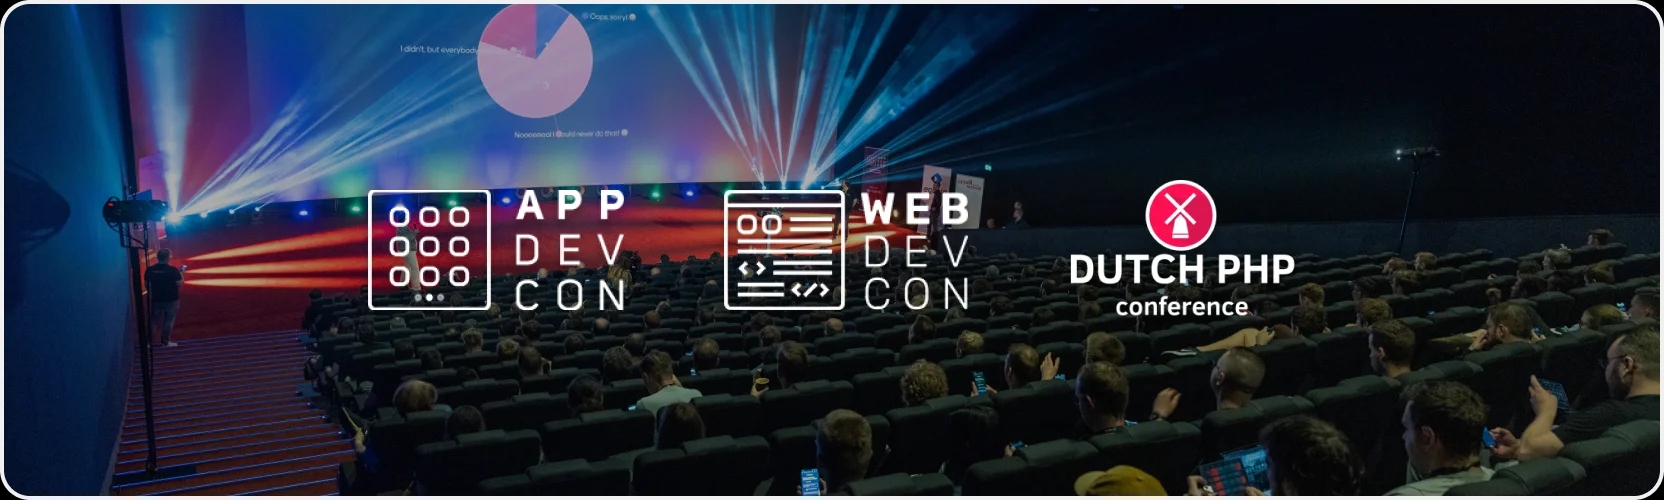 Appdevcon, Webdevcon, and Dutch PHP conferences